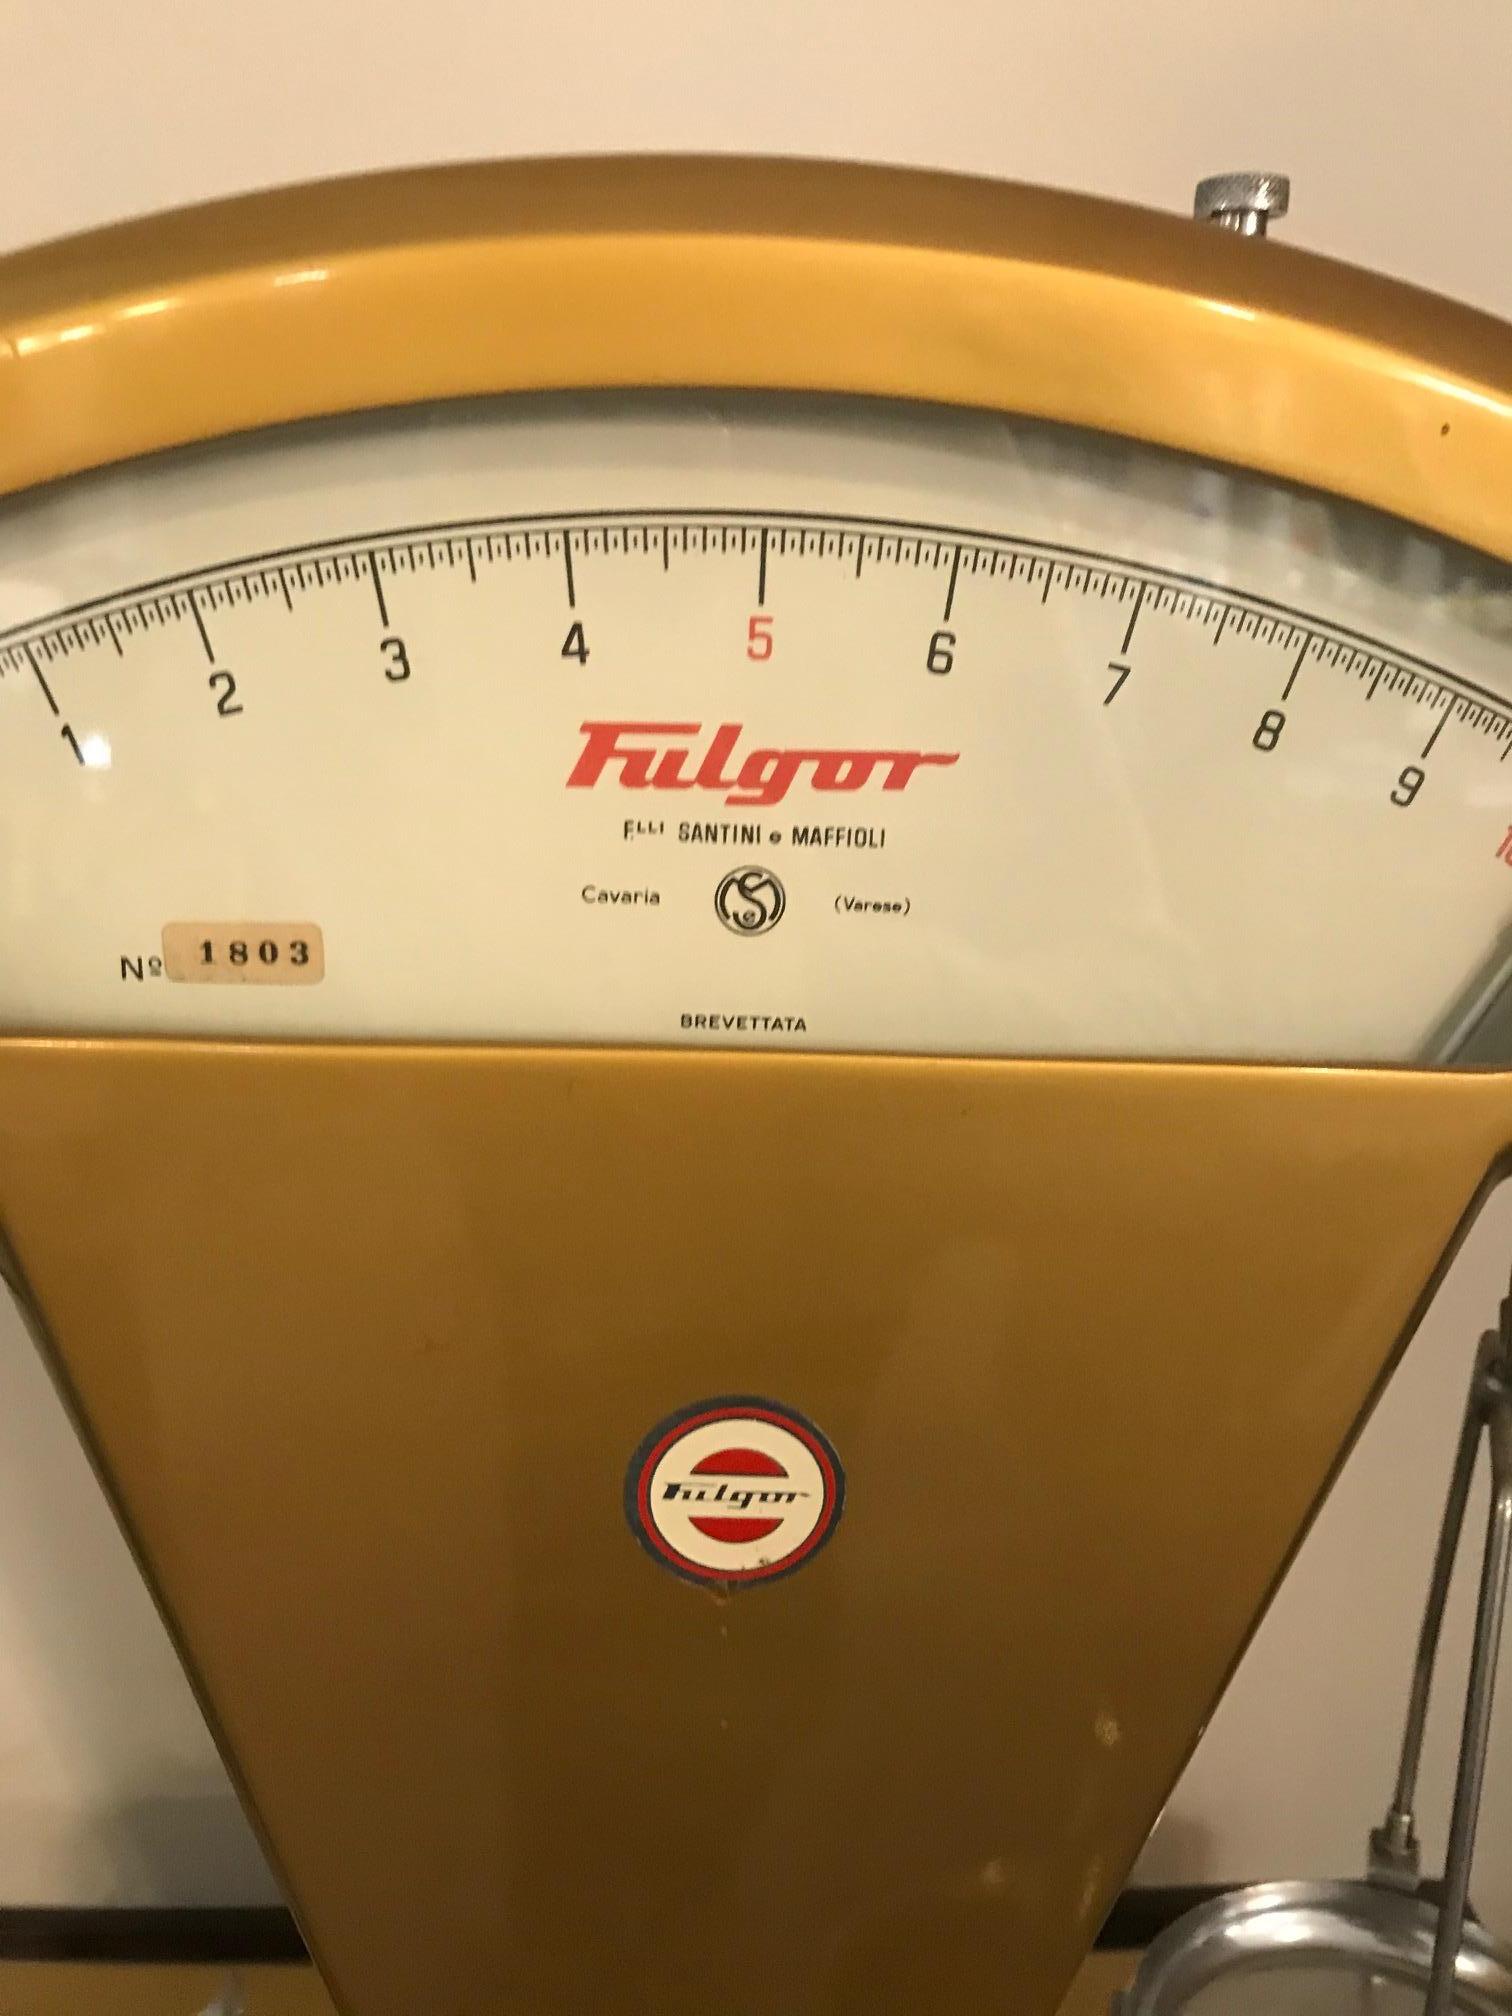 This is a scarce midcentury jewelers or apothecary scale by Fulgor, Italy.
Date: 26th of January 1961.
Highly accurate excellent working condition
Division 50mg, Range 500g
Scale type: 18A
Numbered: 1803
Dual needles allow customers &